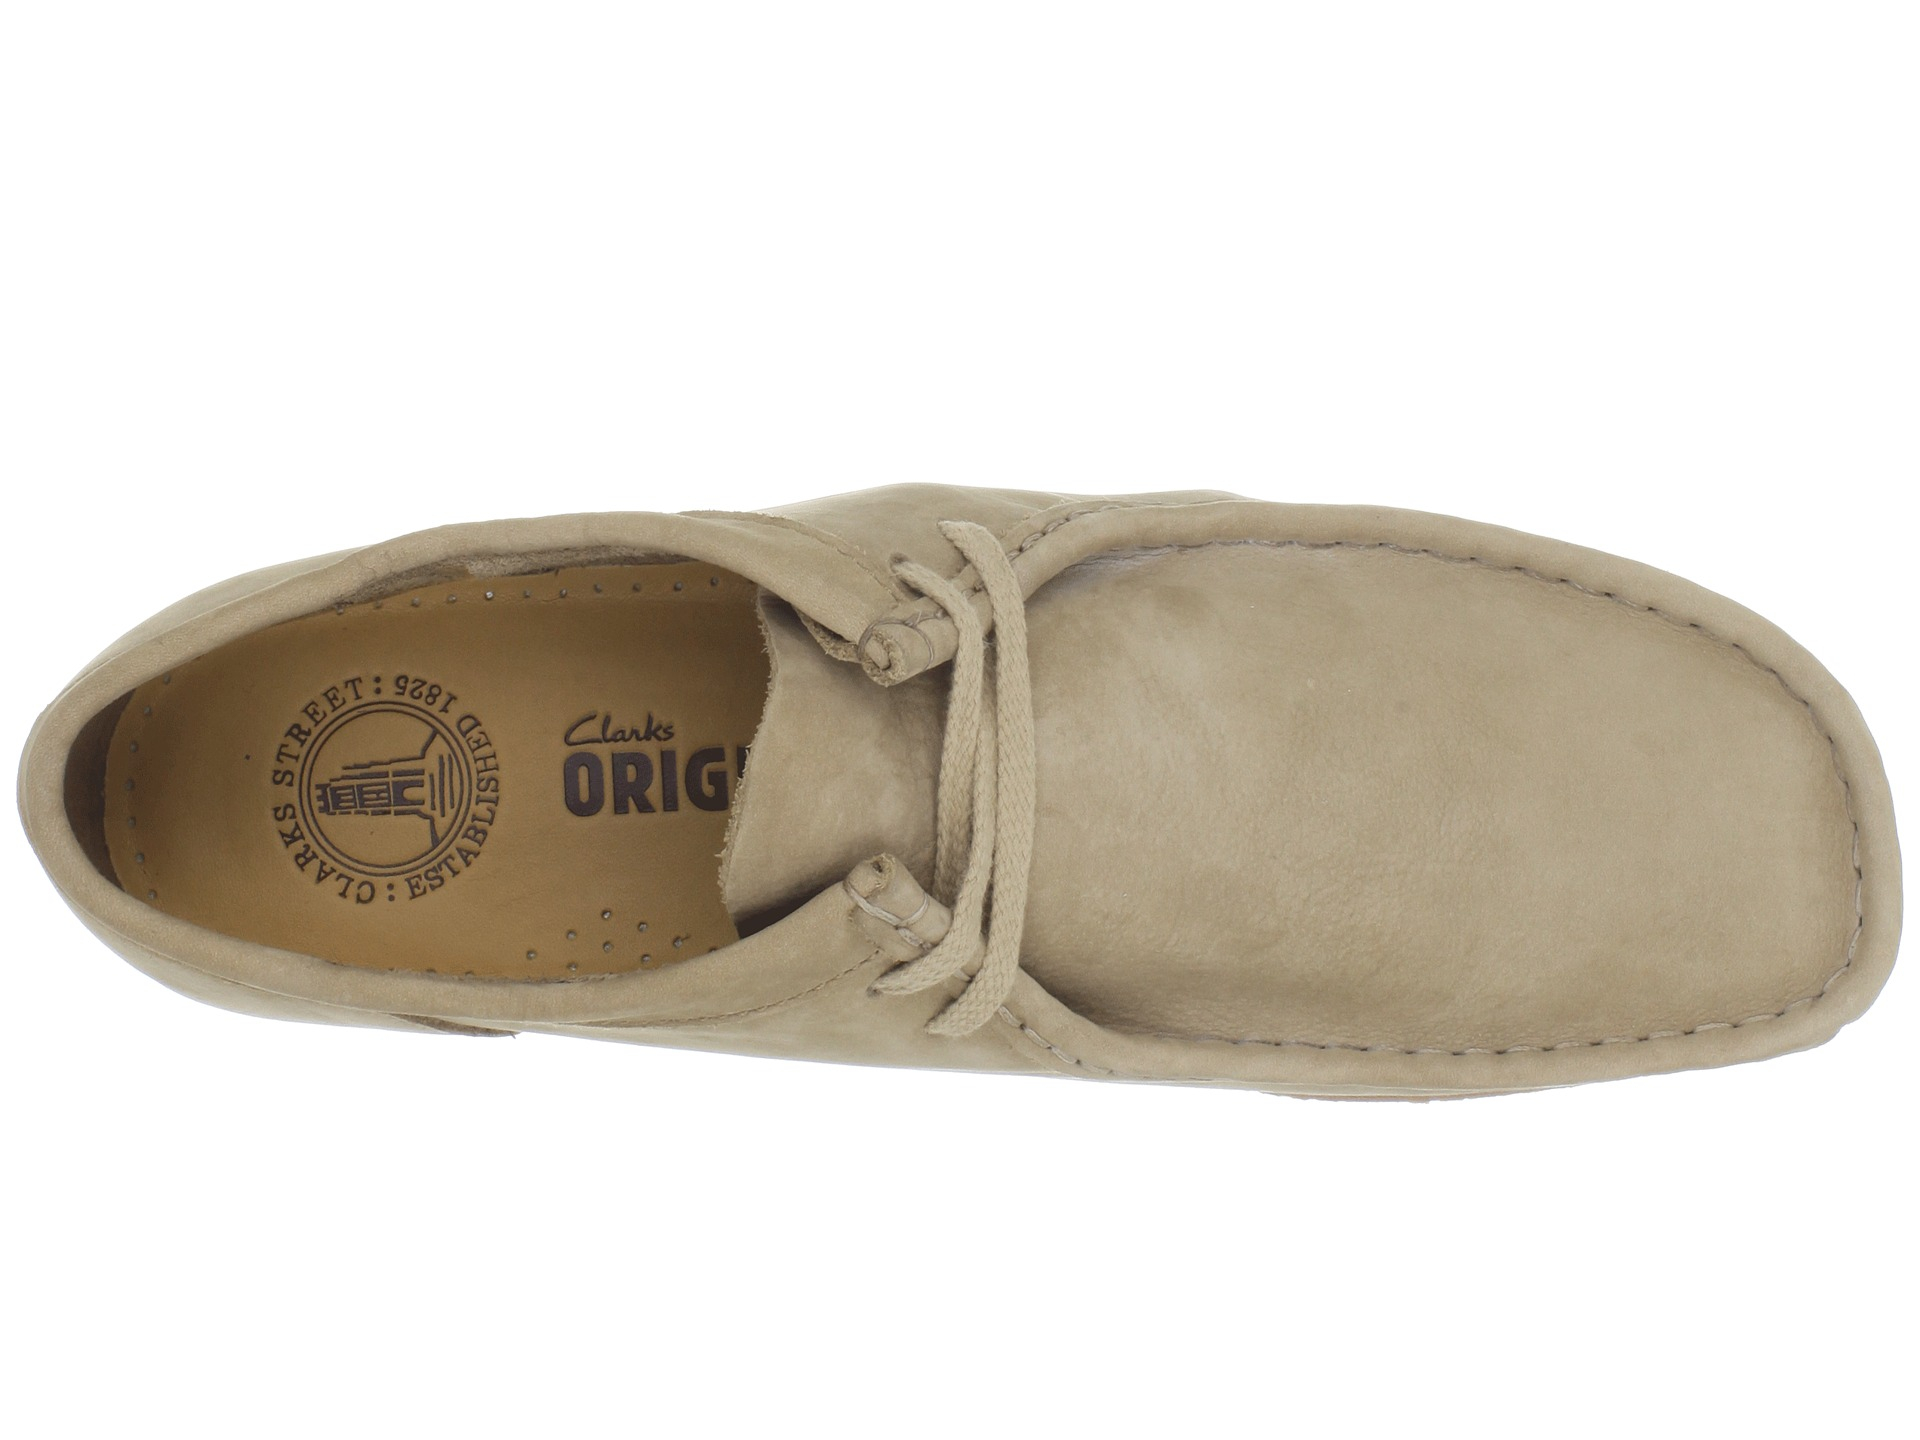 Clarks Wallabee Run in Taupe Nubuck (Natural) for Men - Lyst